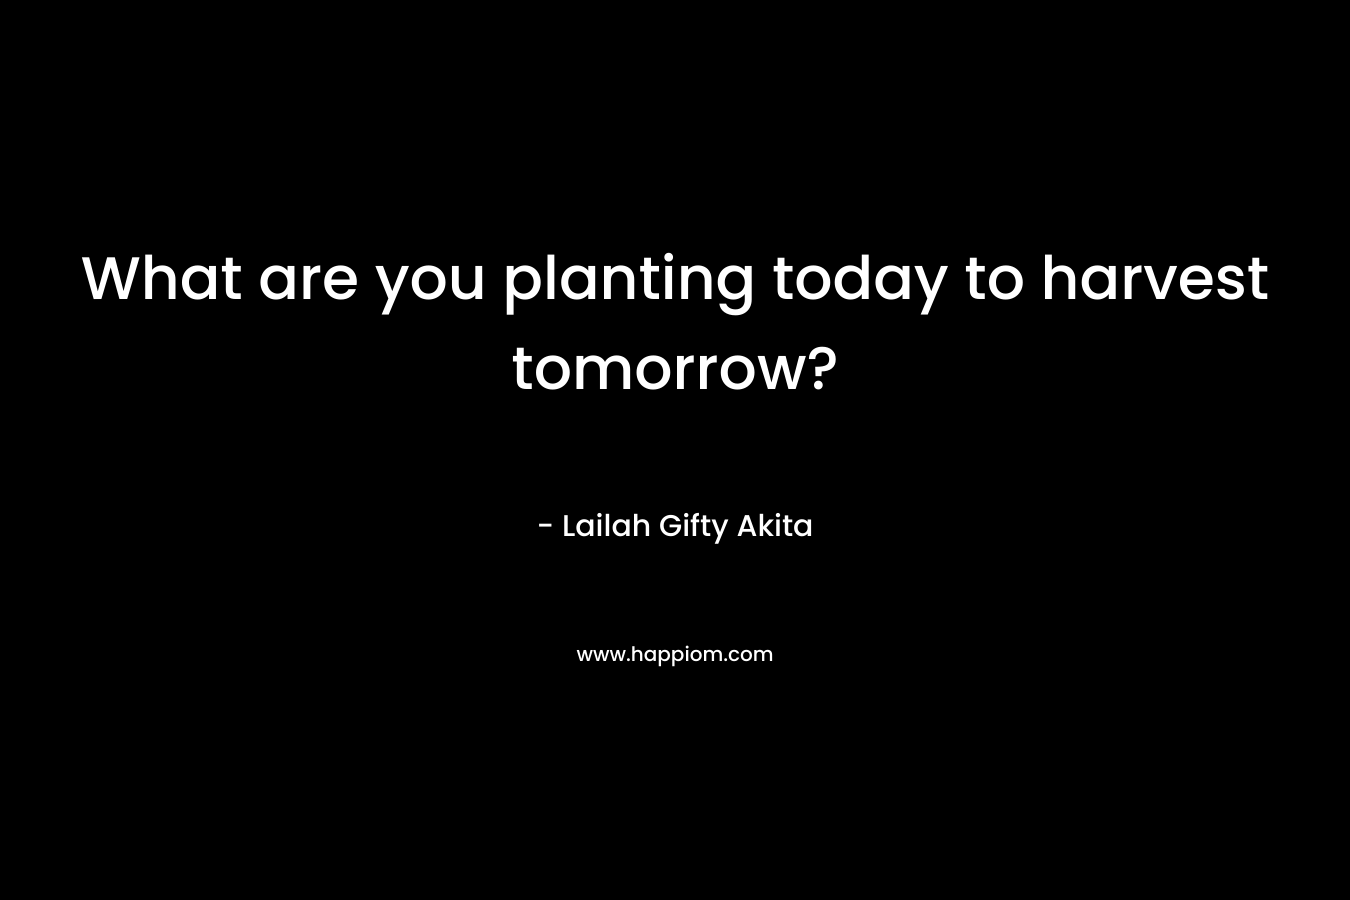 What are you planting today to harvest tomorrow?